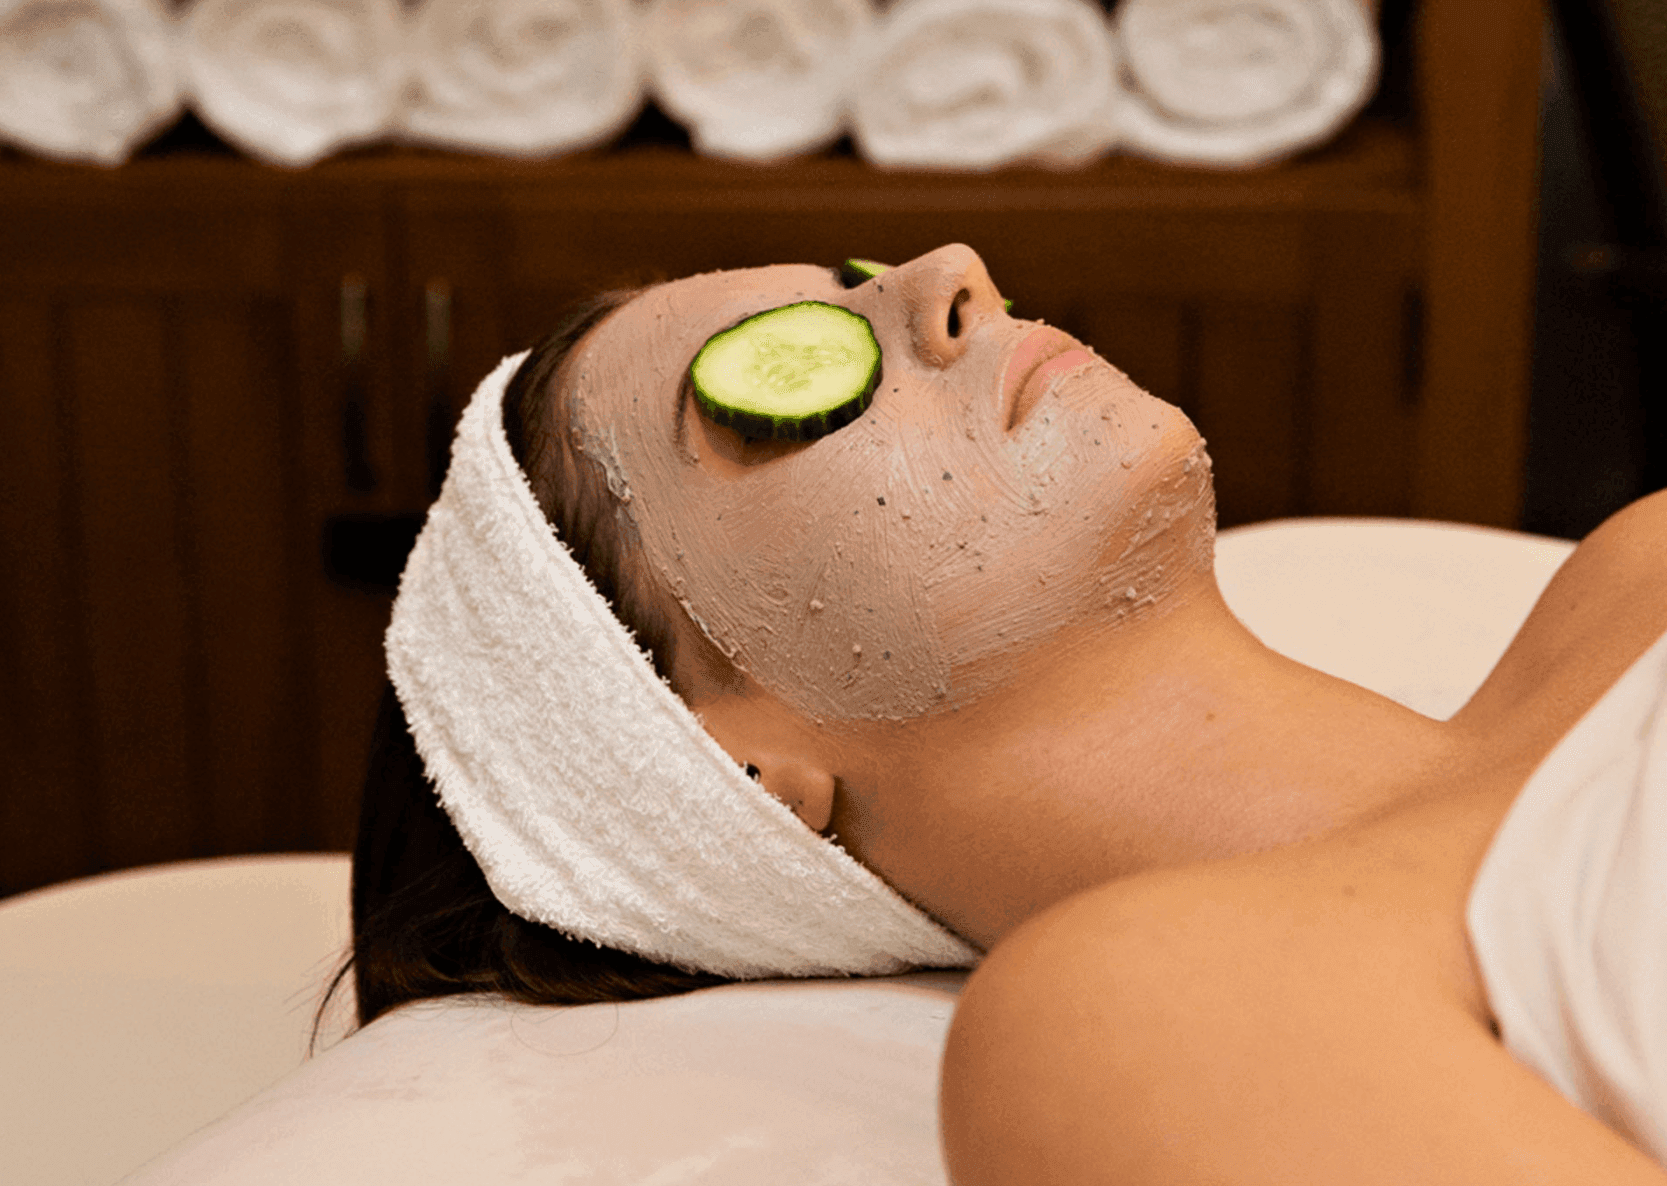 Vijf Shilling Getand Spa Pearl | Spas in Rosemary Beach® | The Pearl Hotel